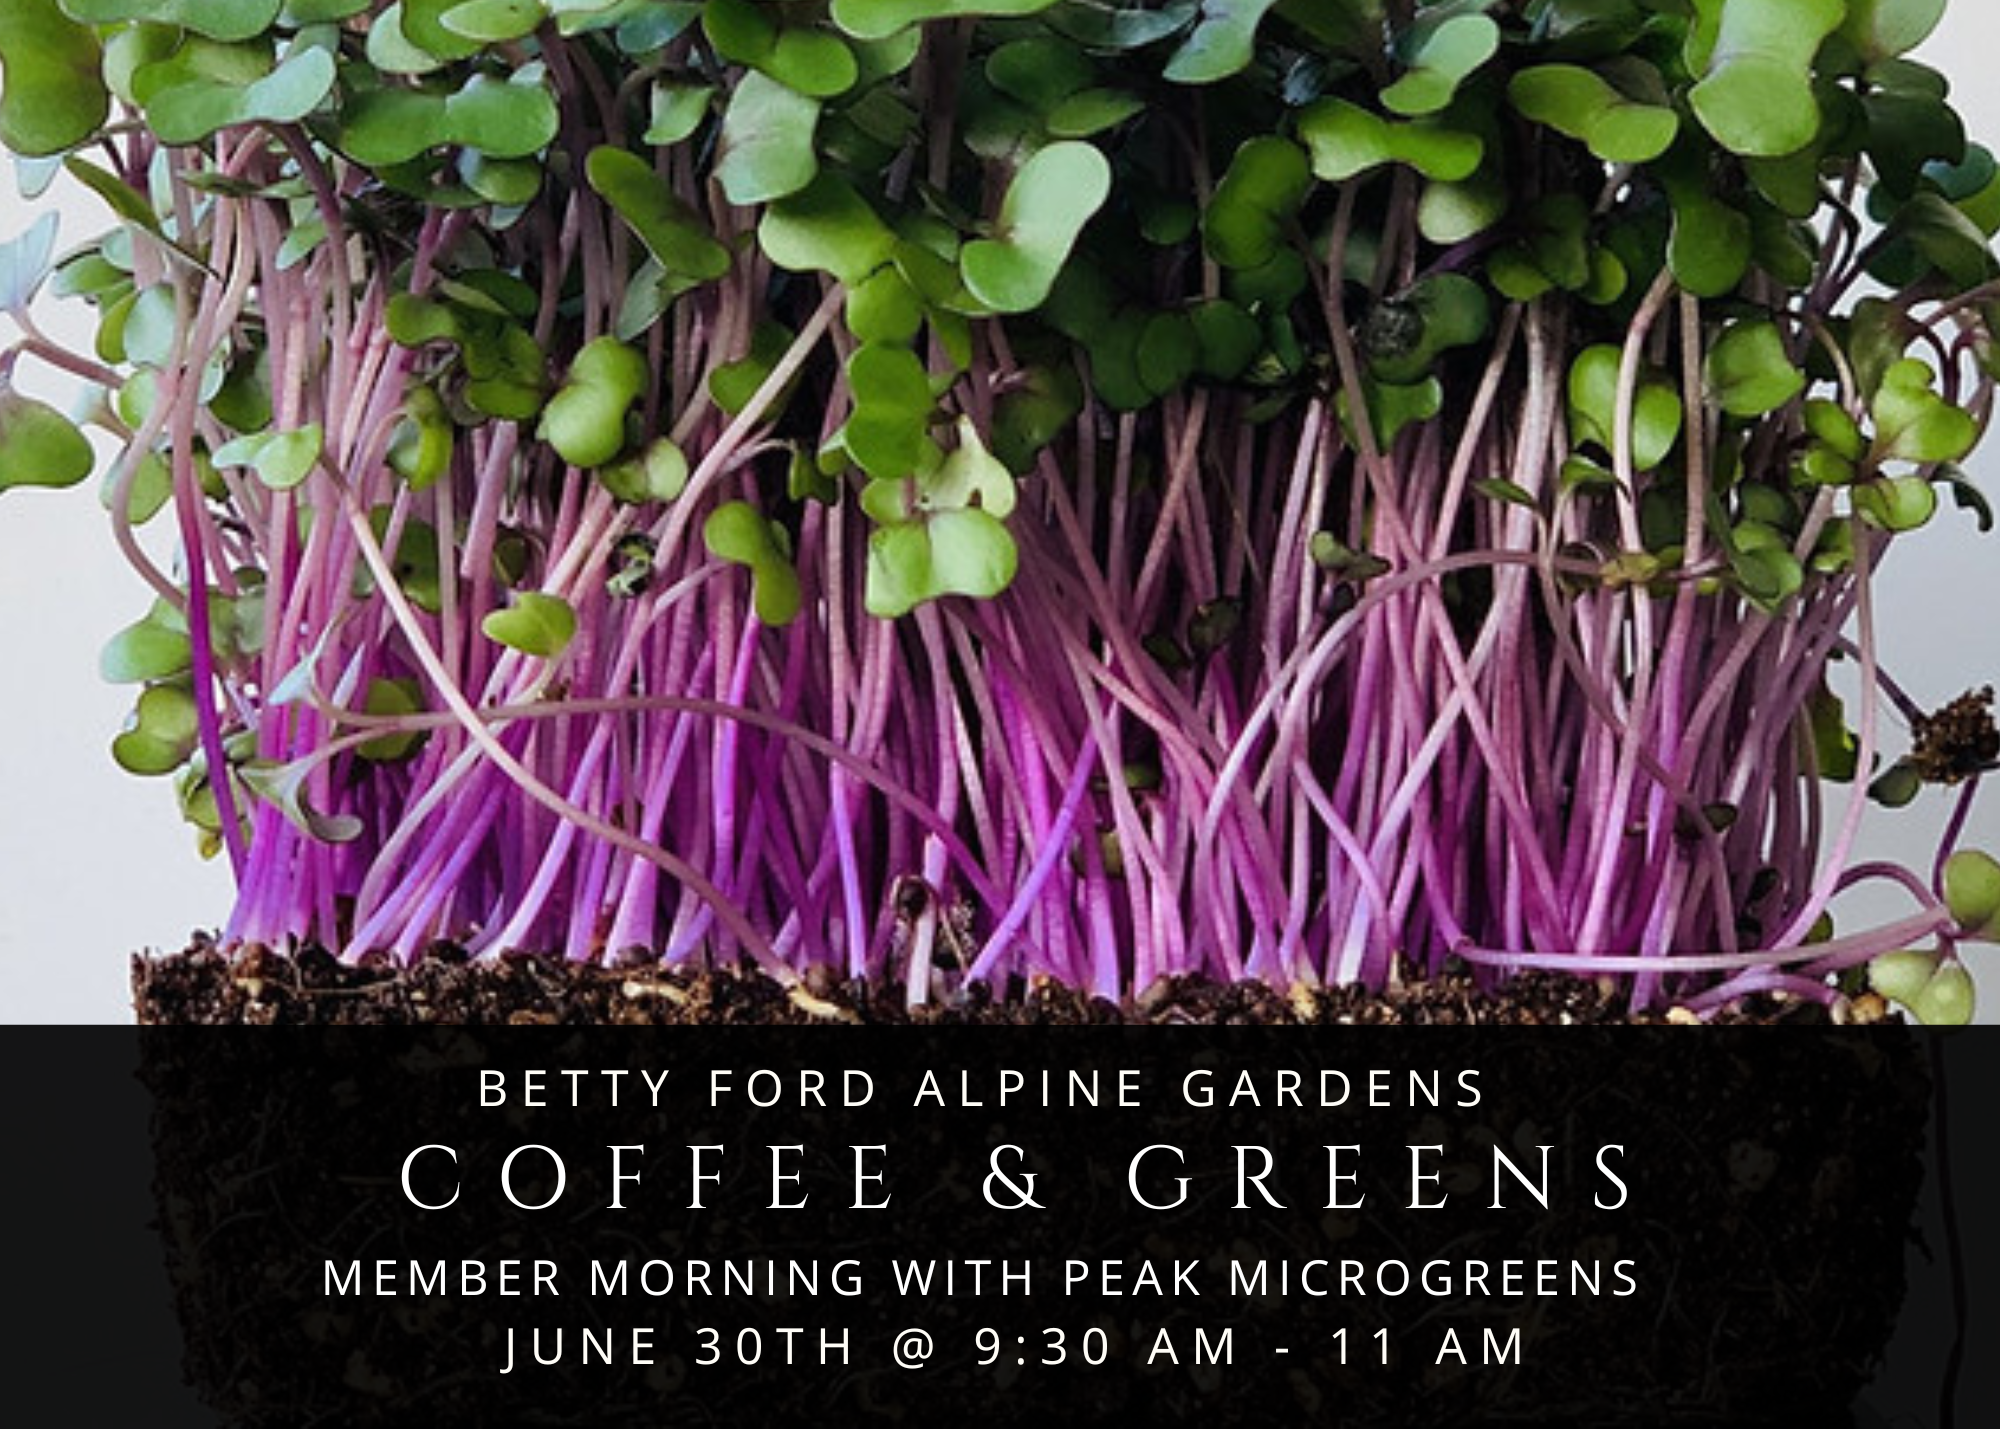 Coffee & Greens in the Betty Ford Alpine Gardens